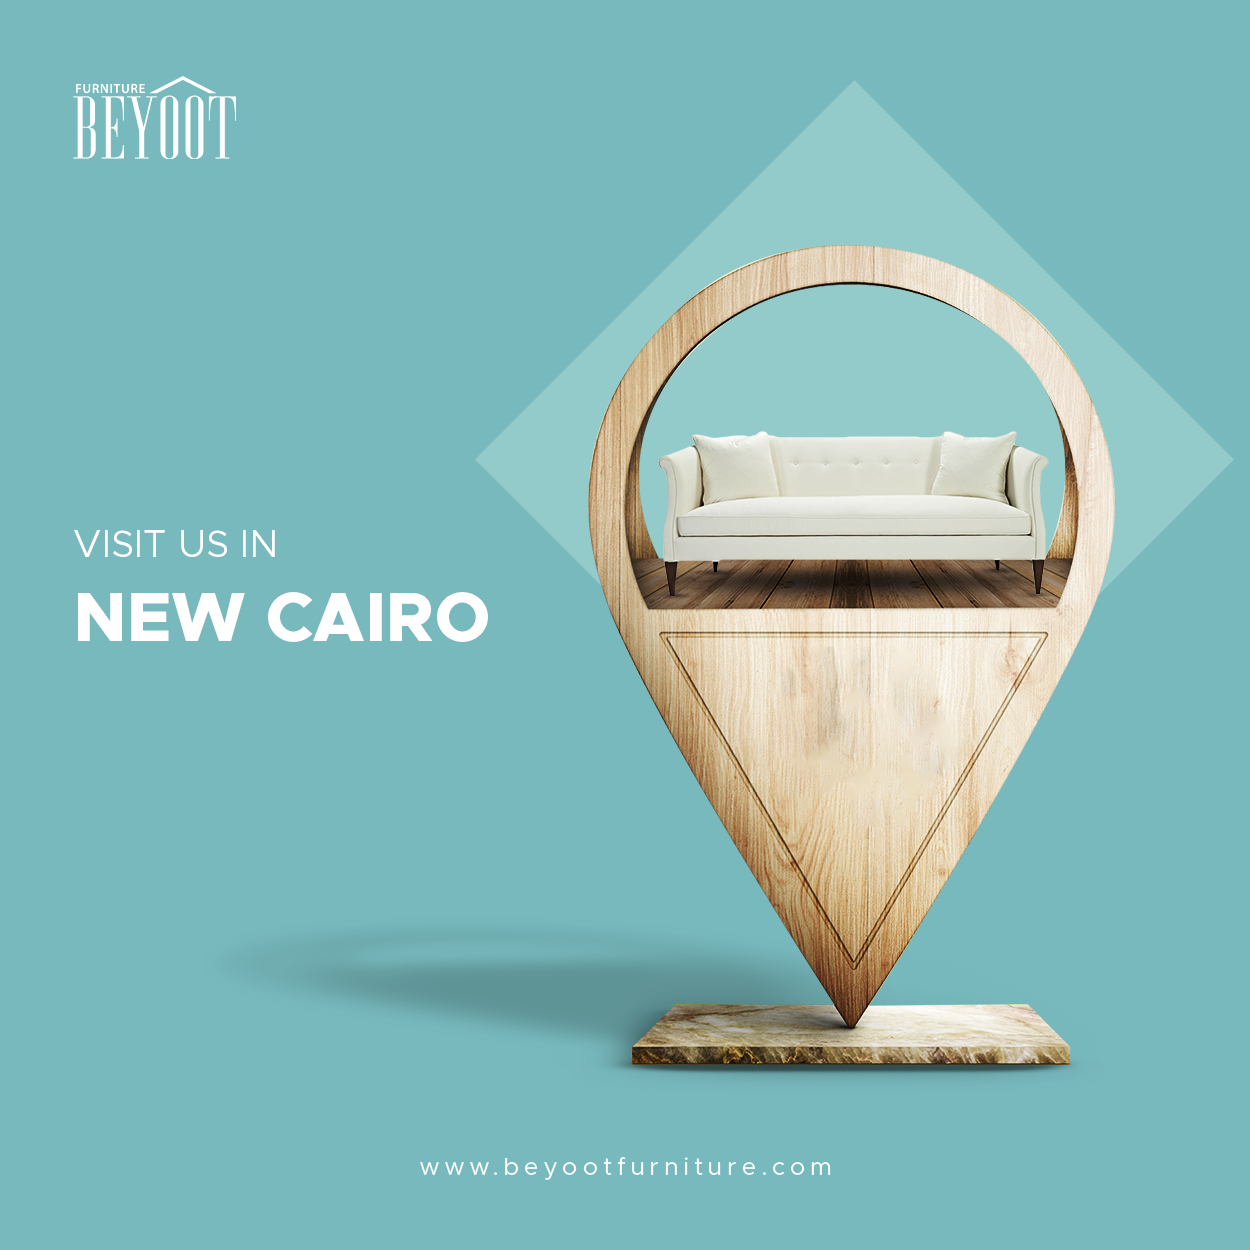 https://theportalagency.com/project/beyoot-furniture/